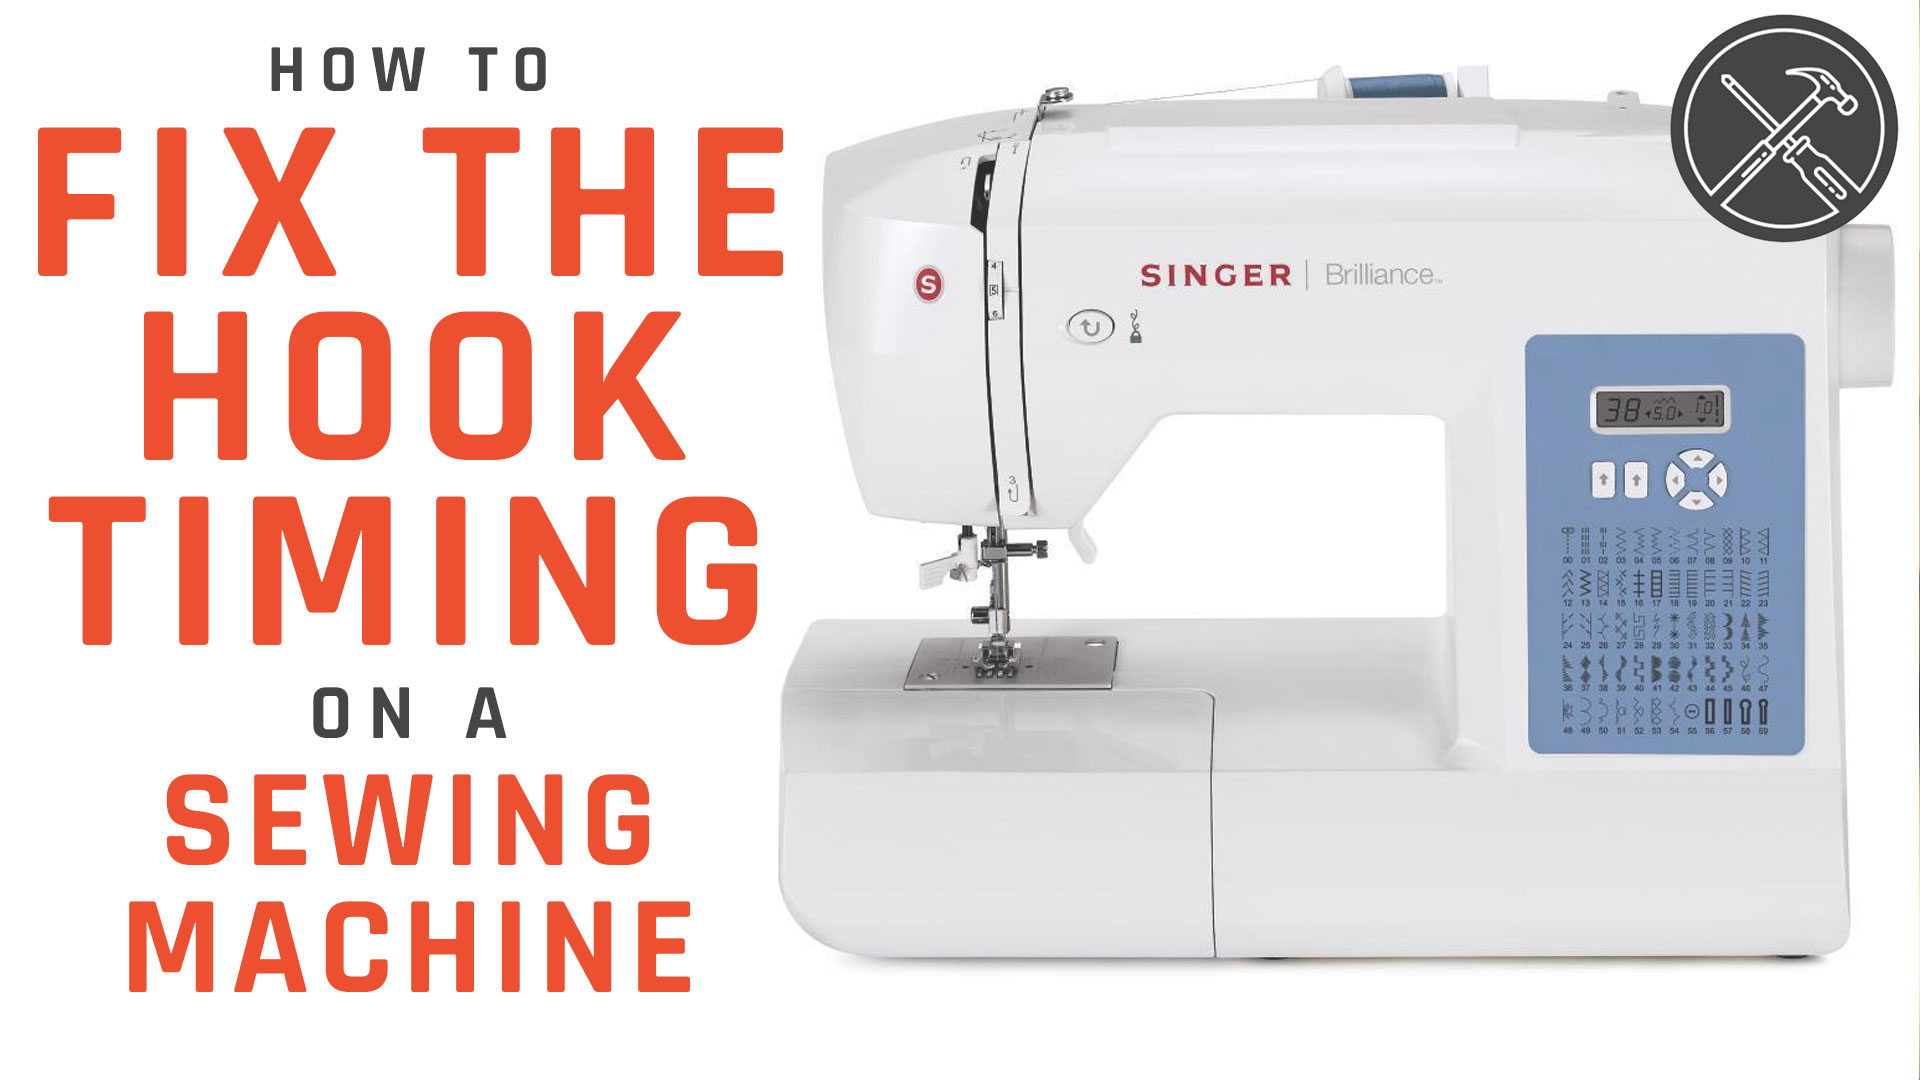 How To Fix The Hook Timing On A Sewing Machine LRN2DIY